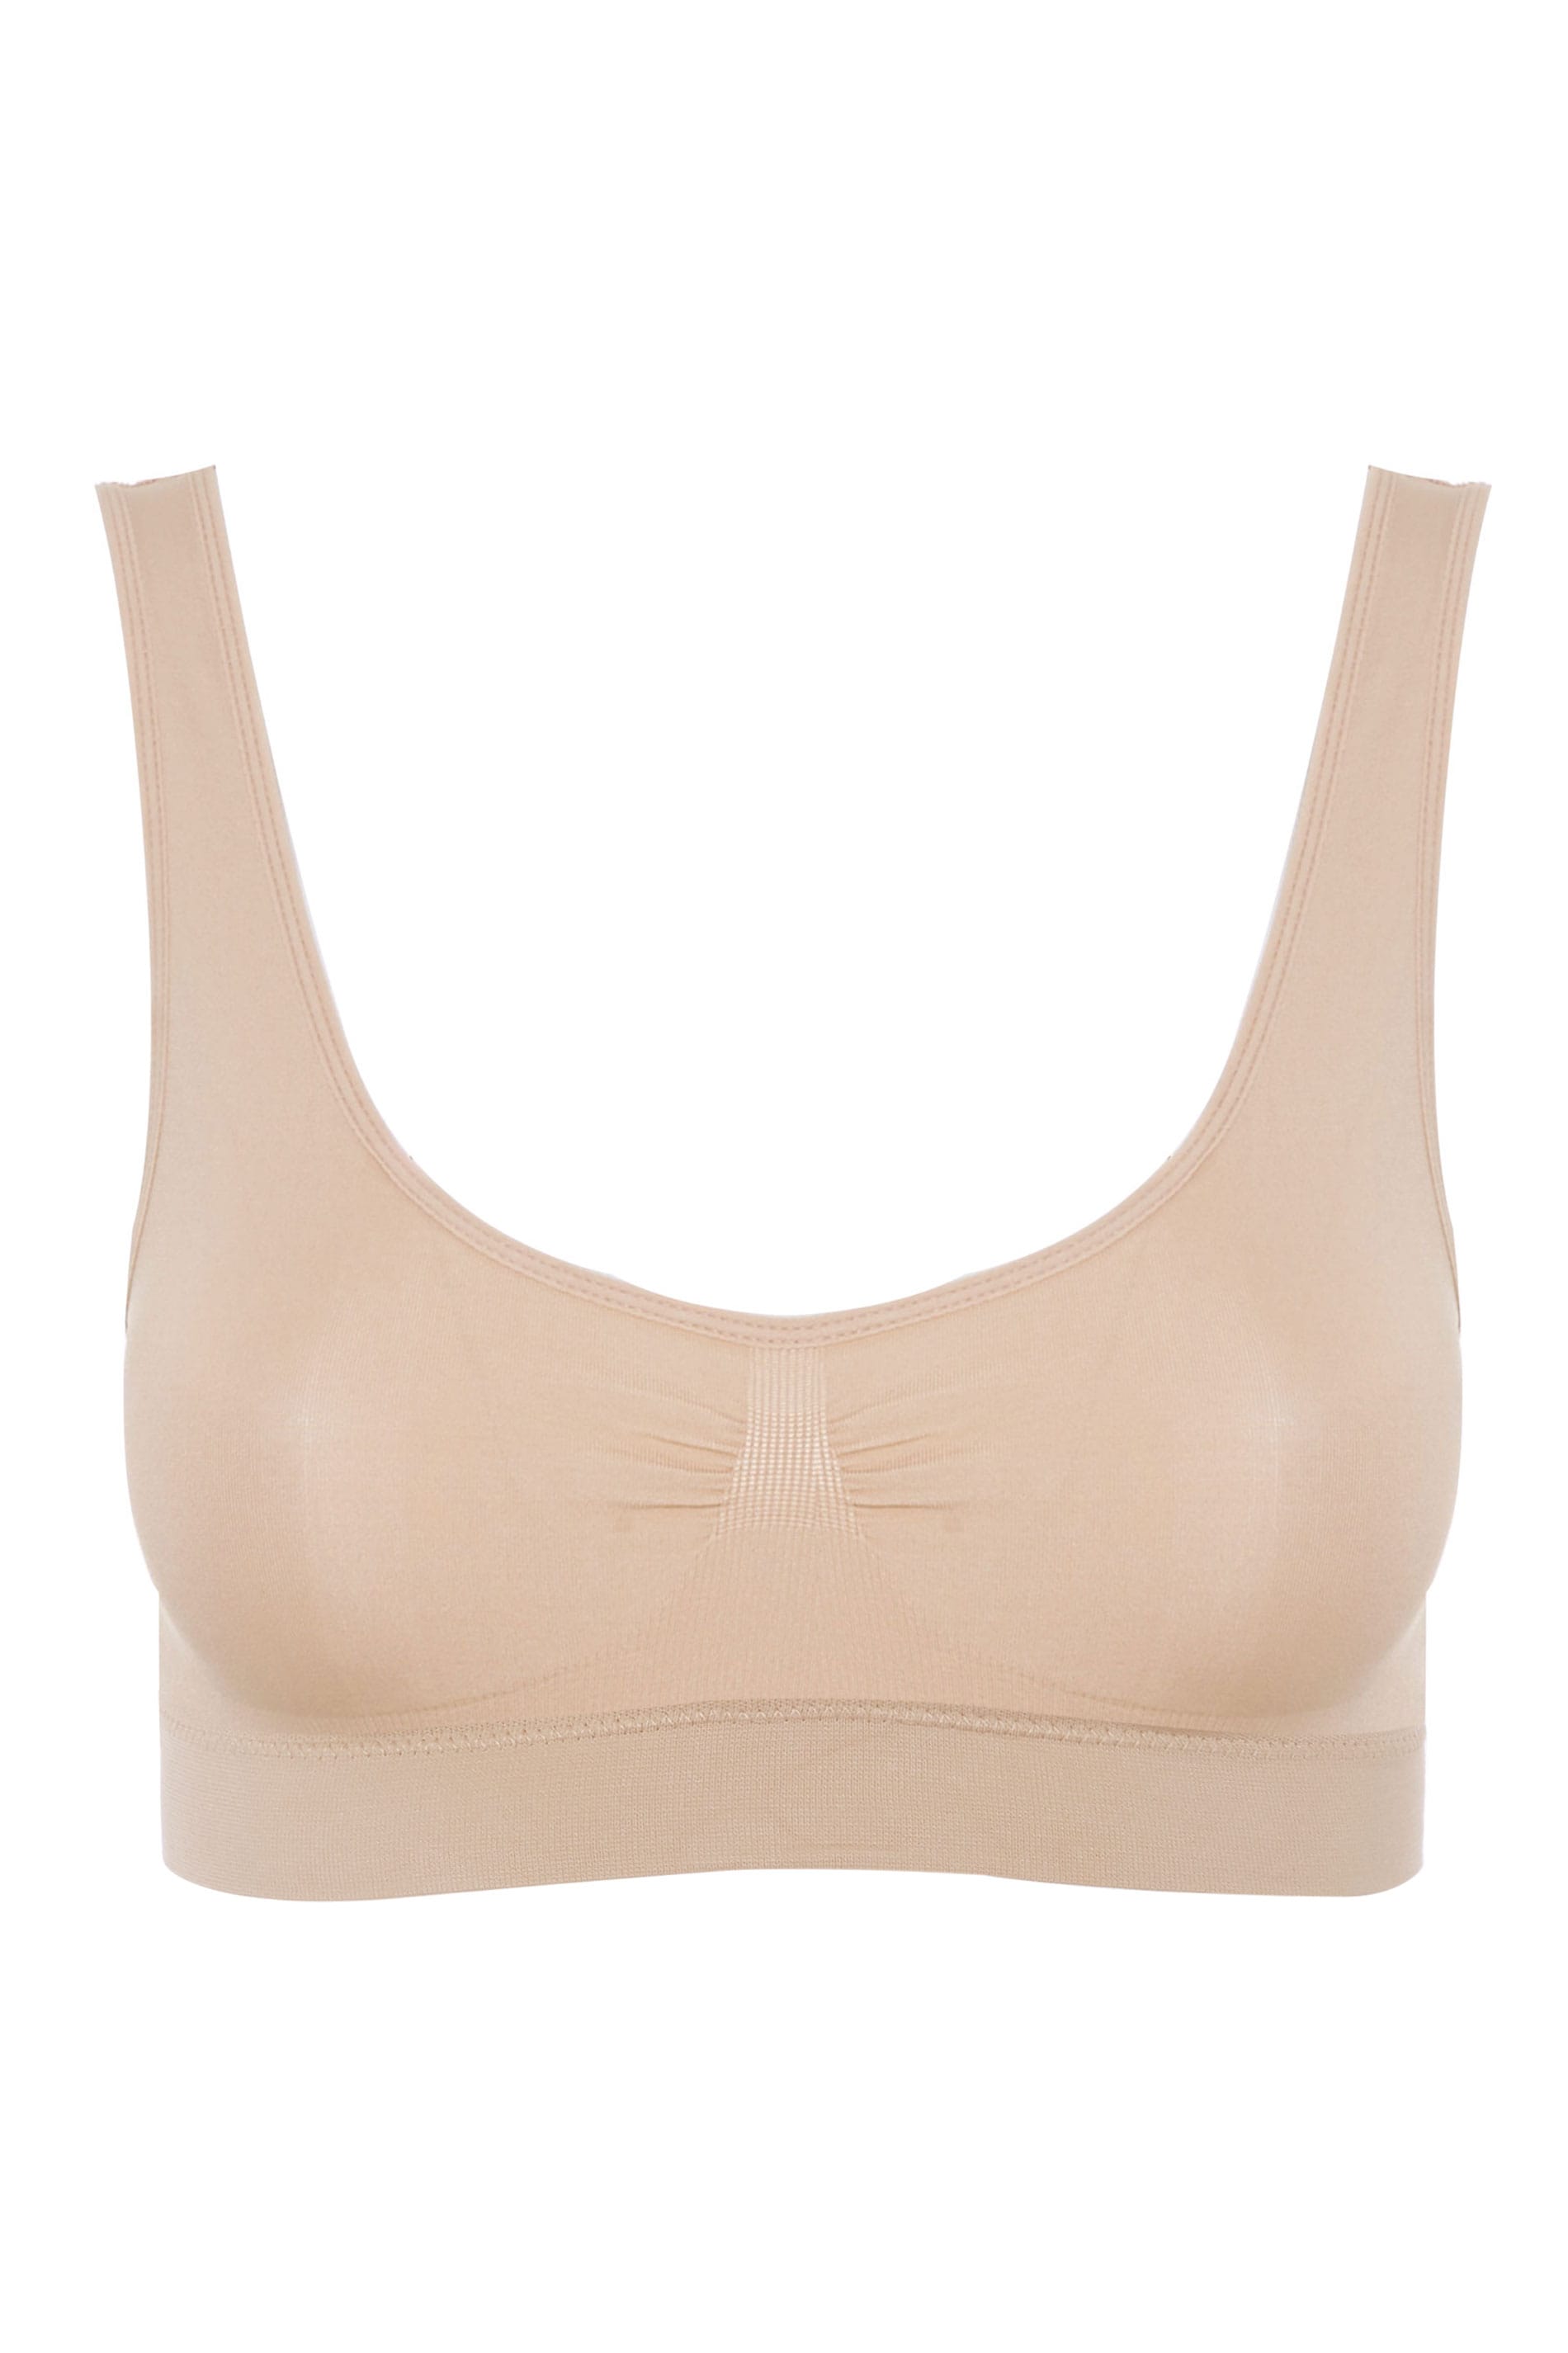 https://cdn.yoursclothing.com/Images/ProductImages/Nude_Seamless_Padded_Bra_146332_1cbc.jpg